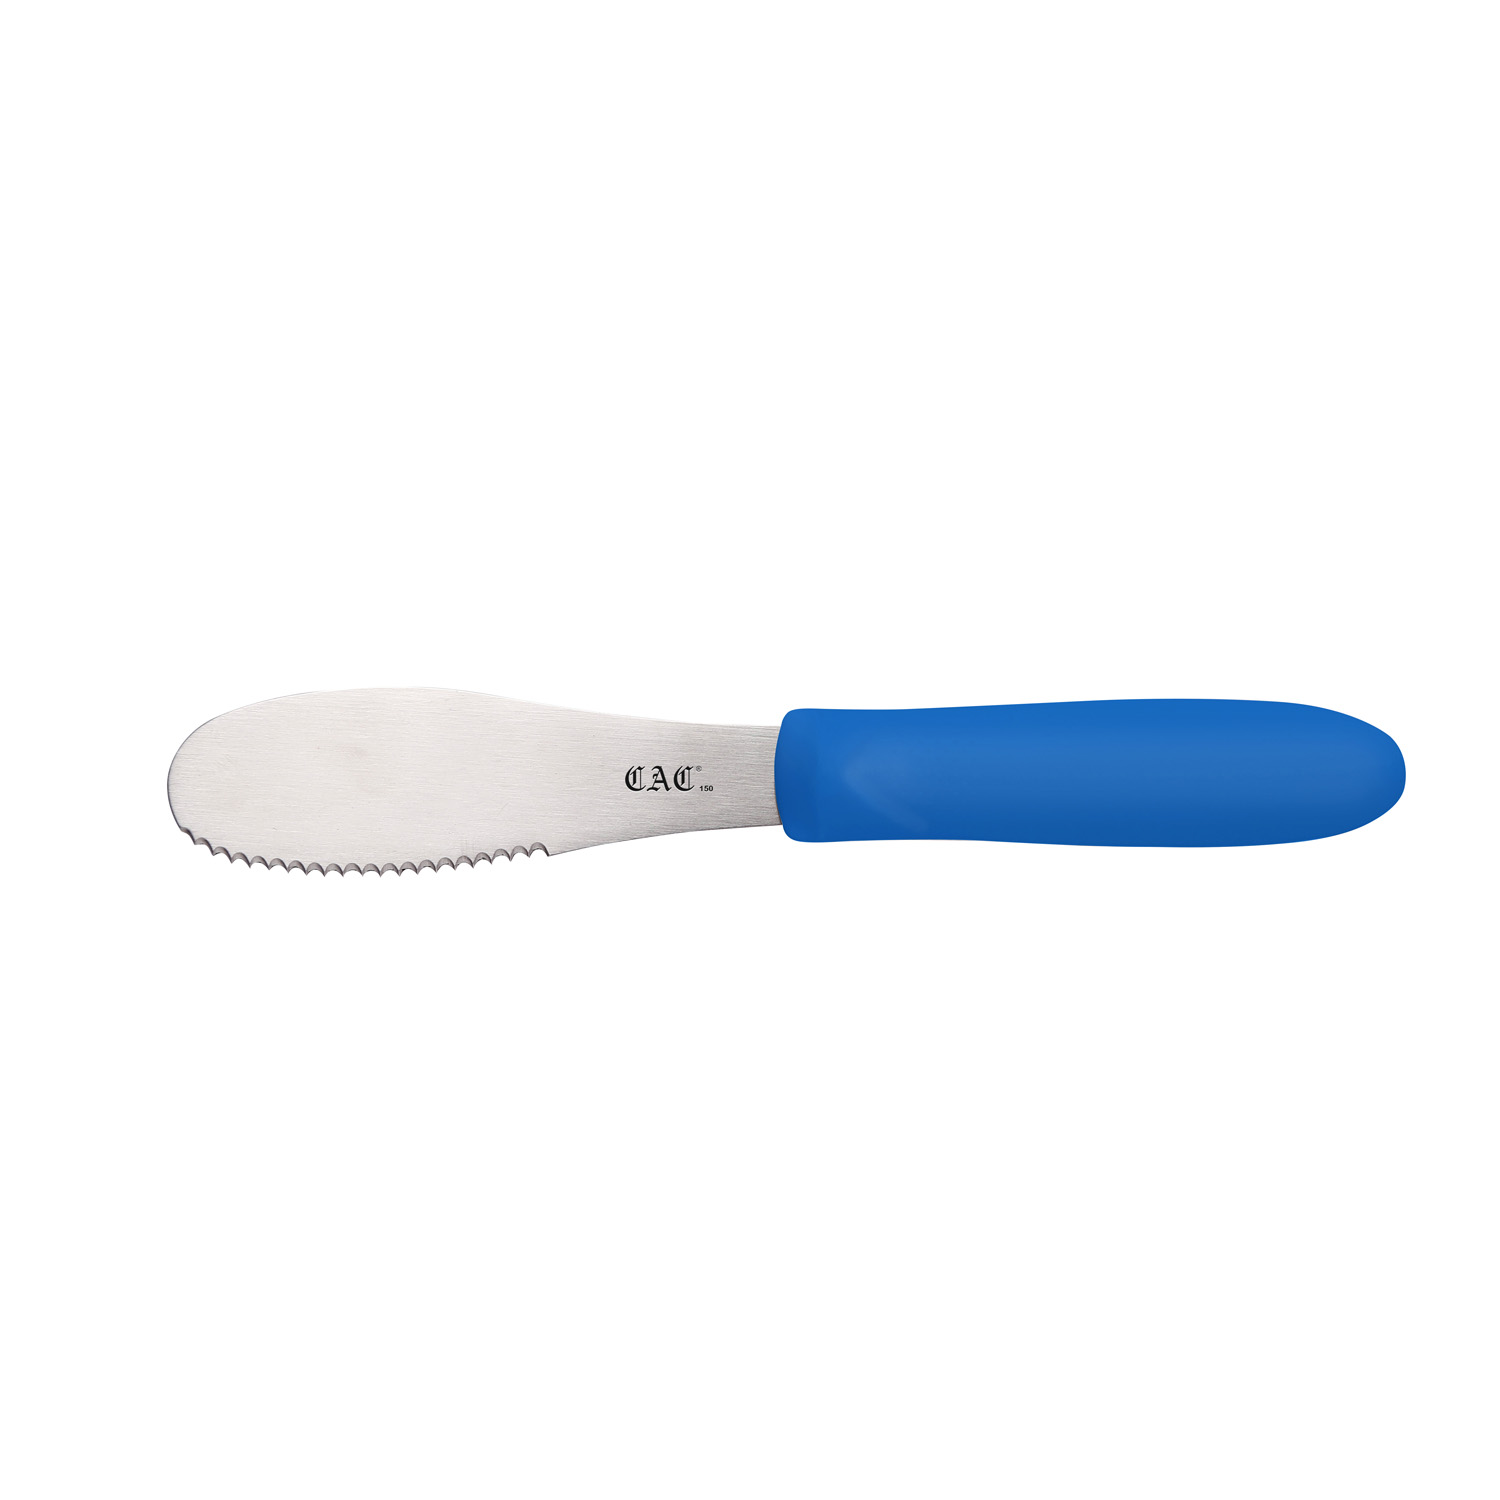 CAC China SPSP-4BL Blue Serrated Spreader with Plastic Handle 3-7/8"